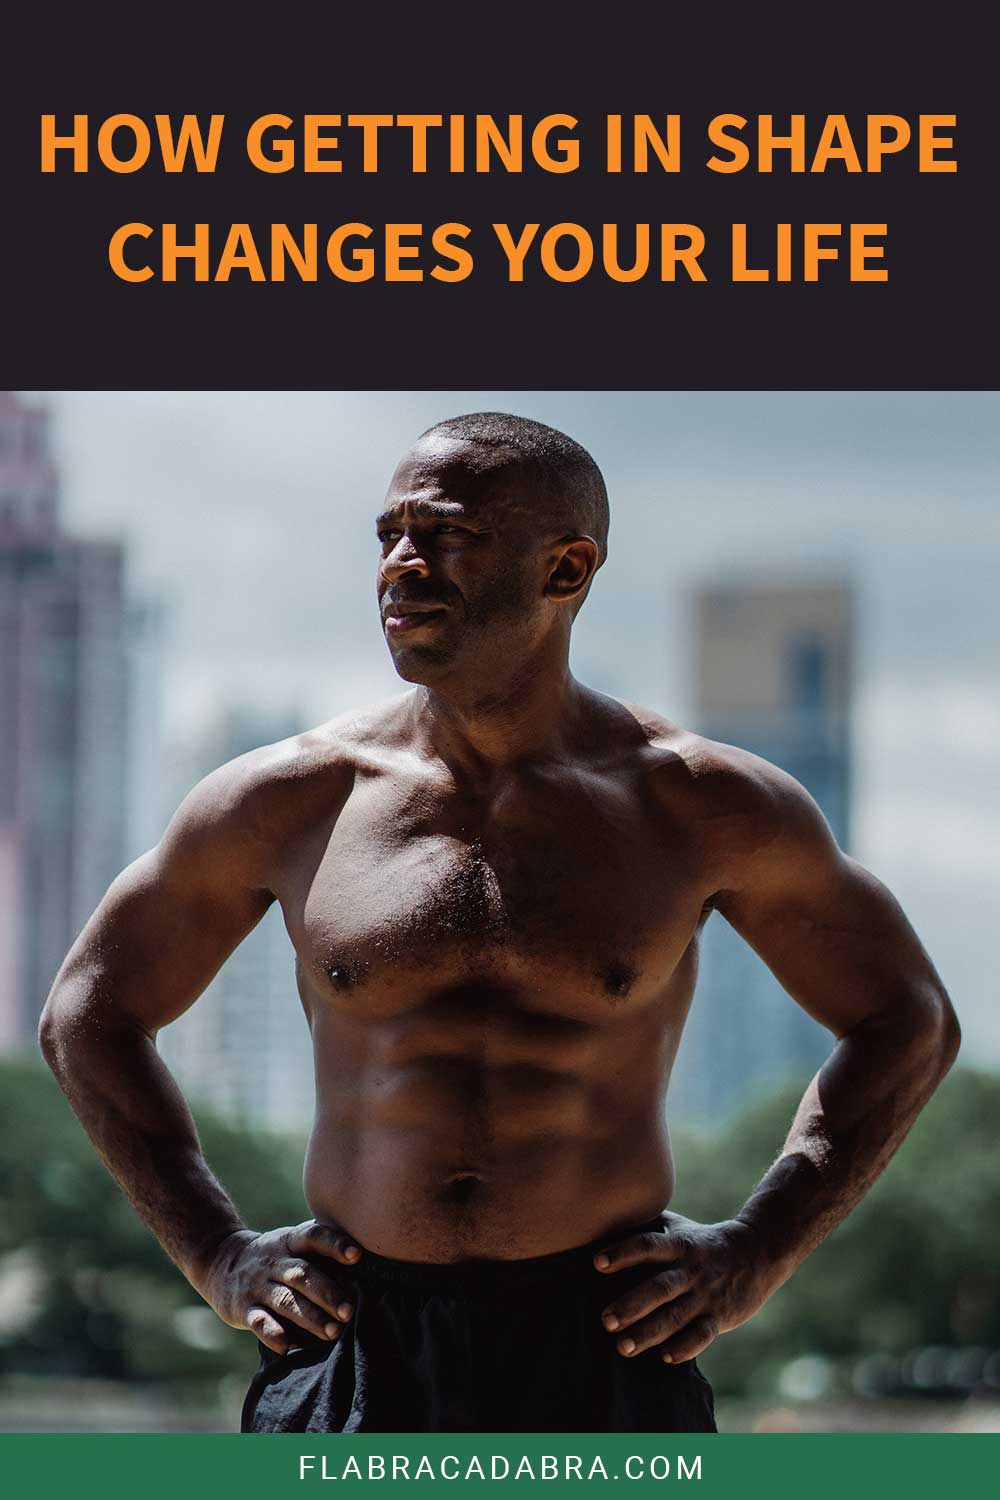 A fit black man wearing no top wear holding hands on his waist - Getting In Shape Changes Your Life.